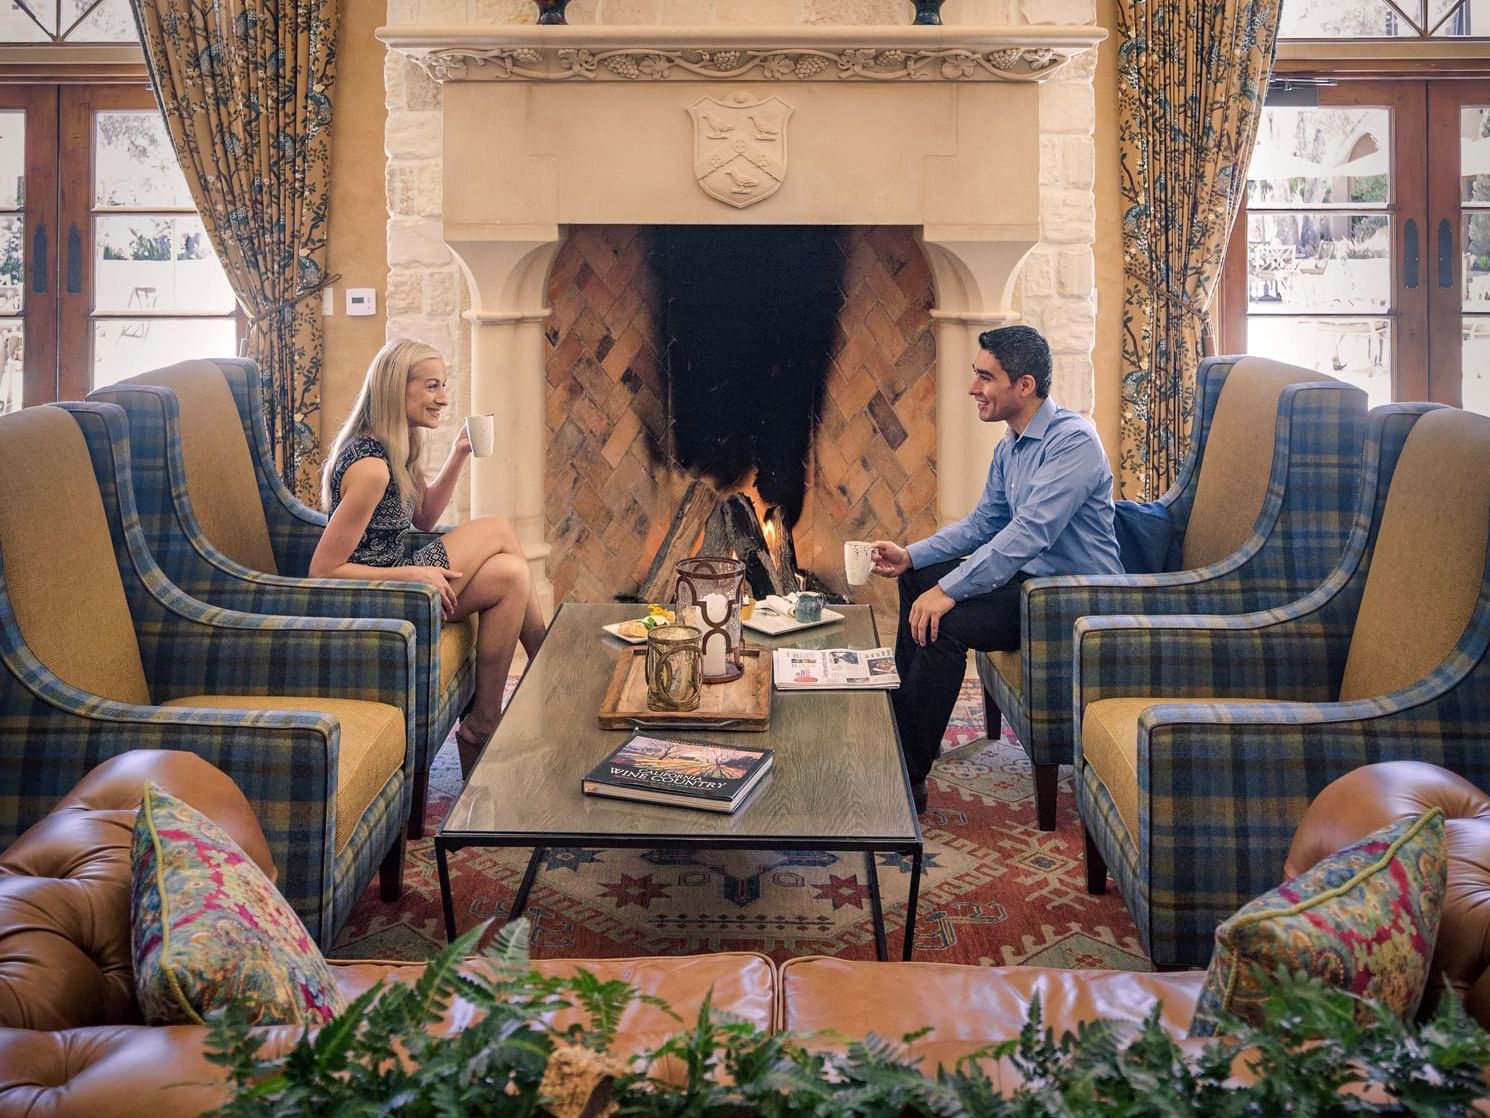 Man and woman sitting in front of fireplace drinking coffee